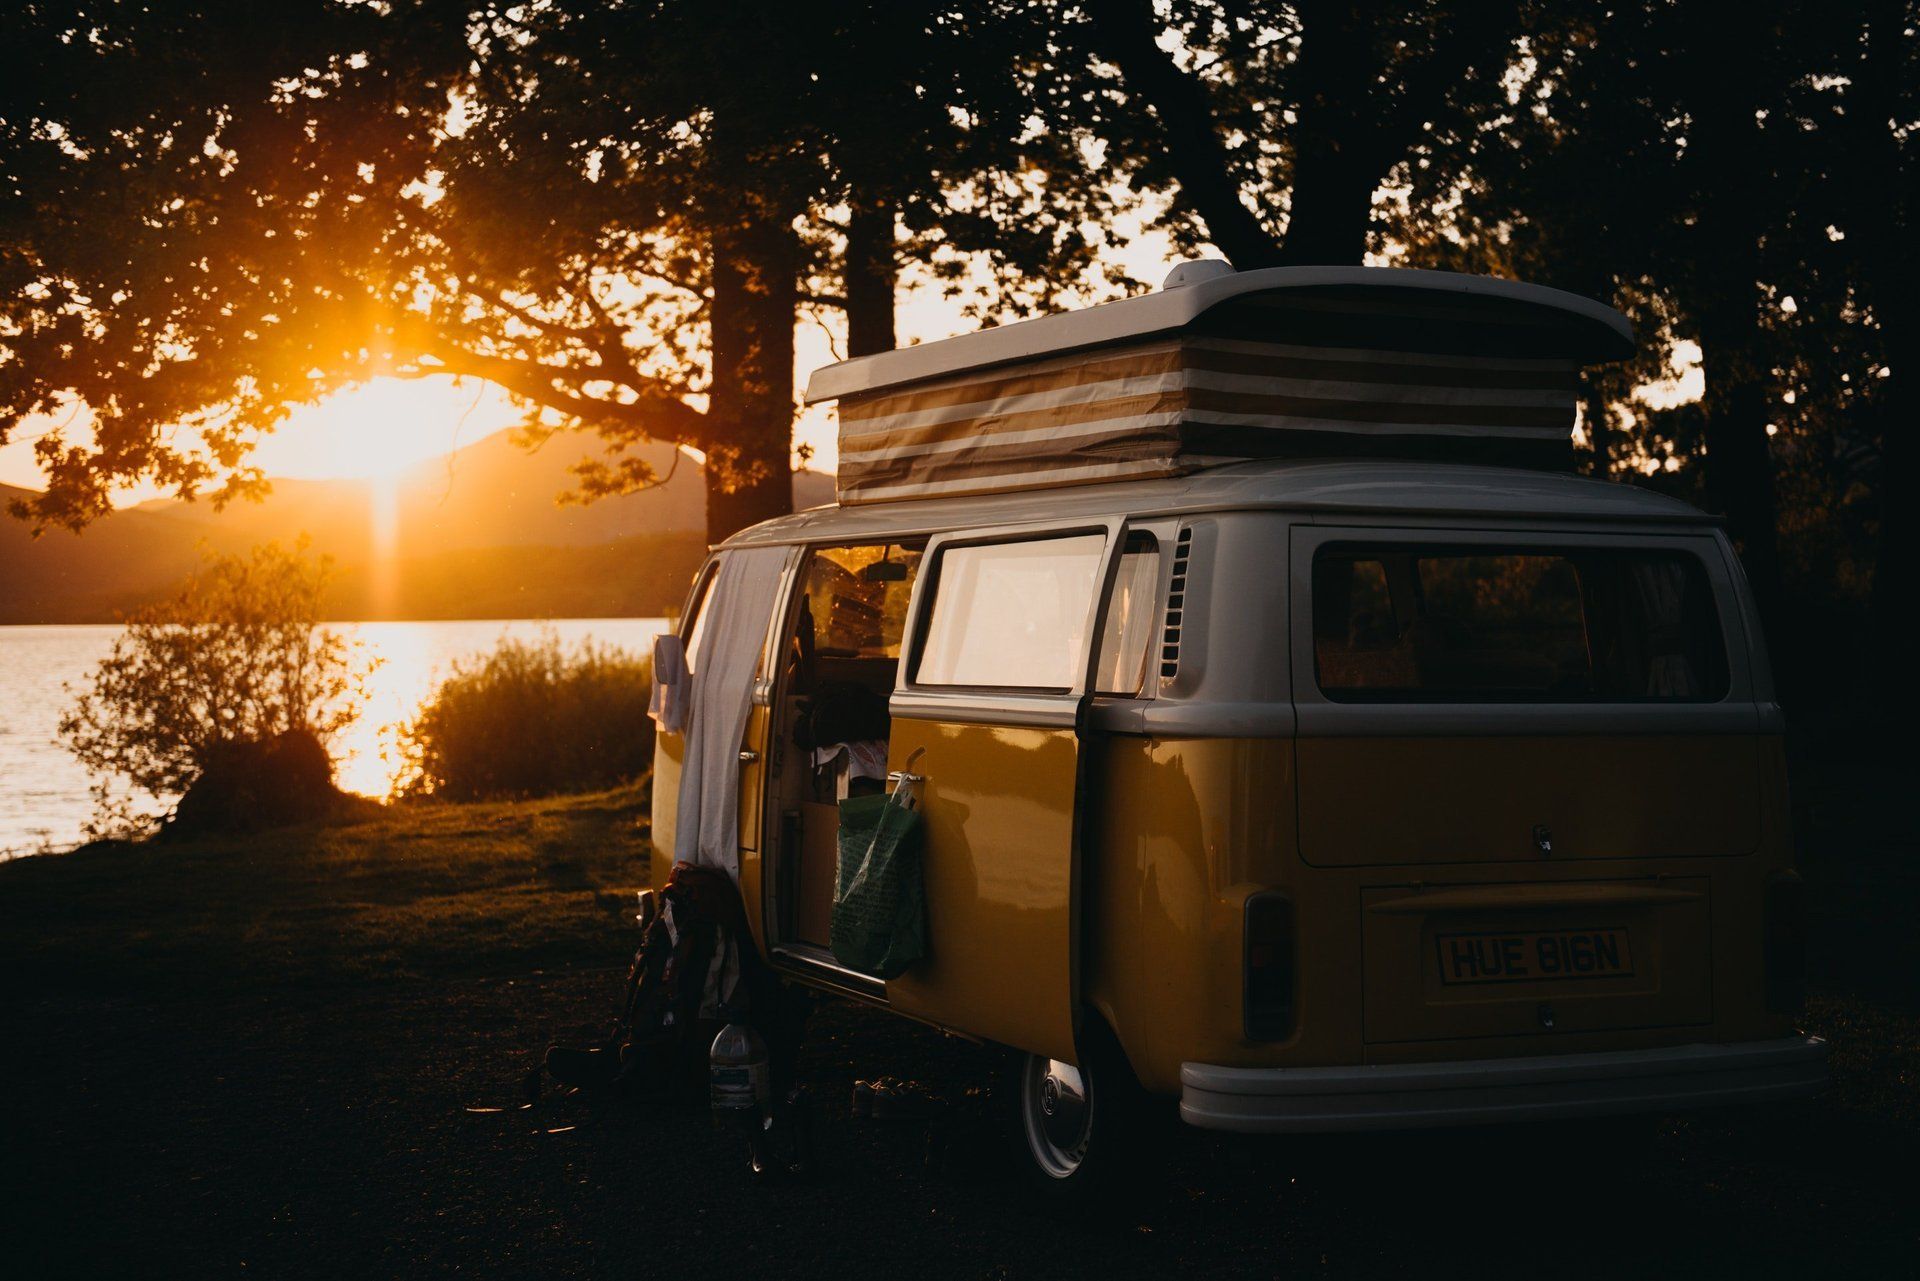 Camper parked by lake at sunset